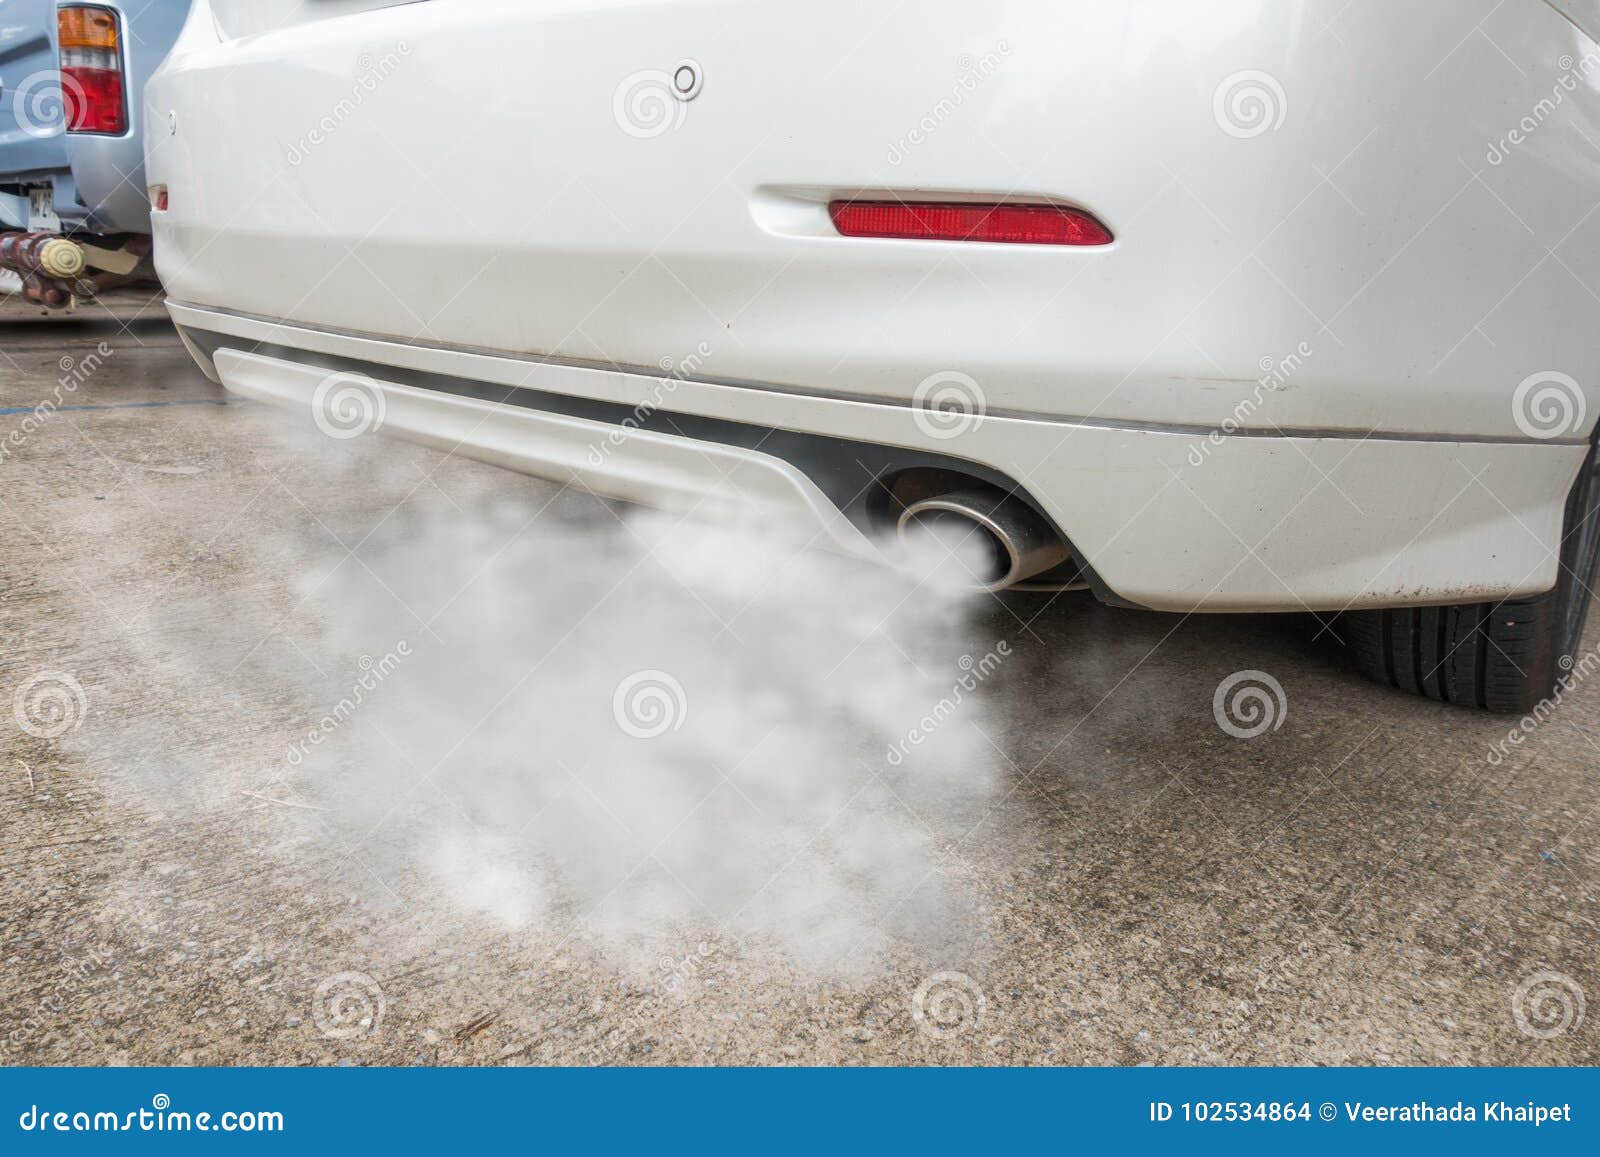 car exhaust pipe comes out strongly of smoke, air pollution concept